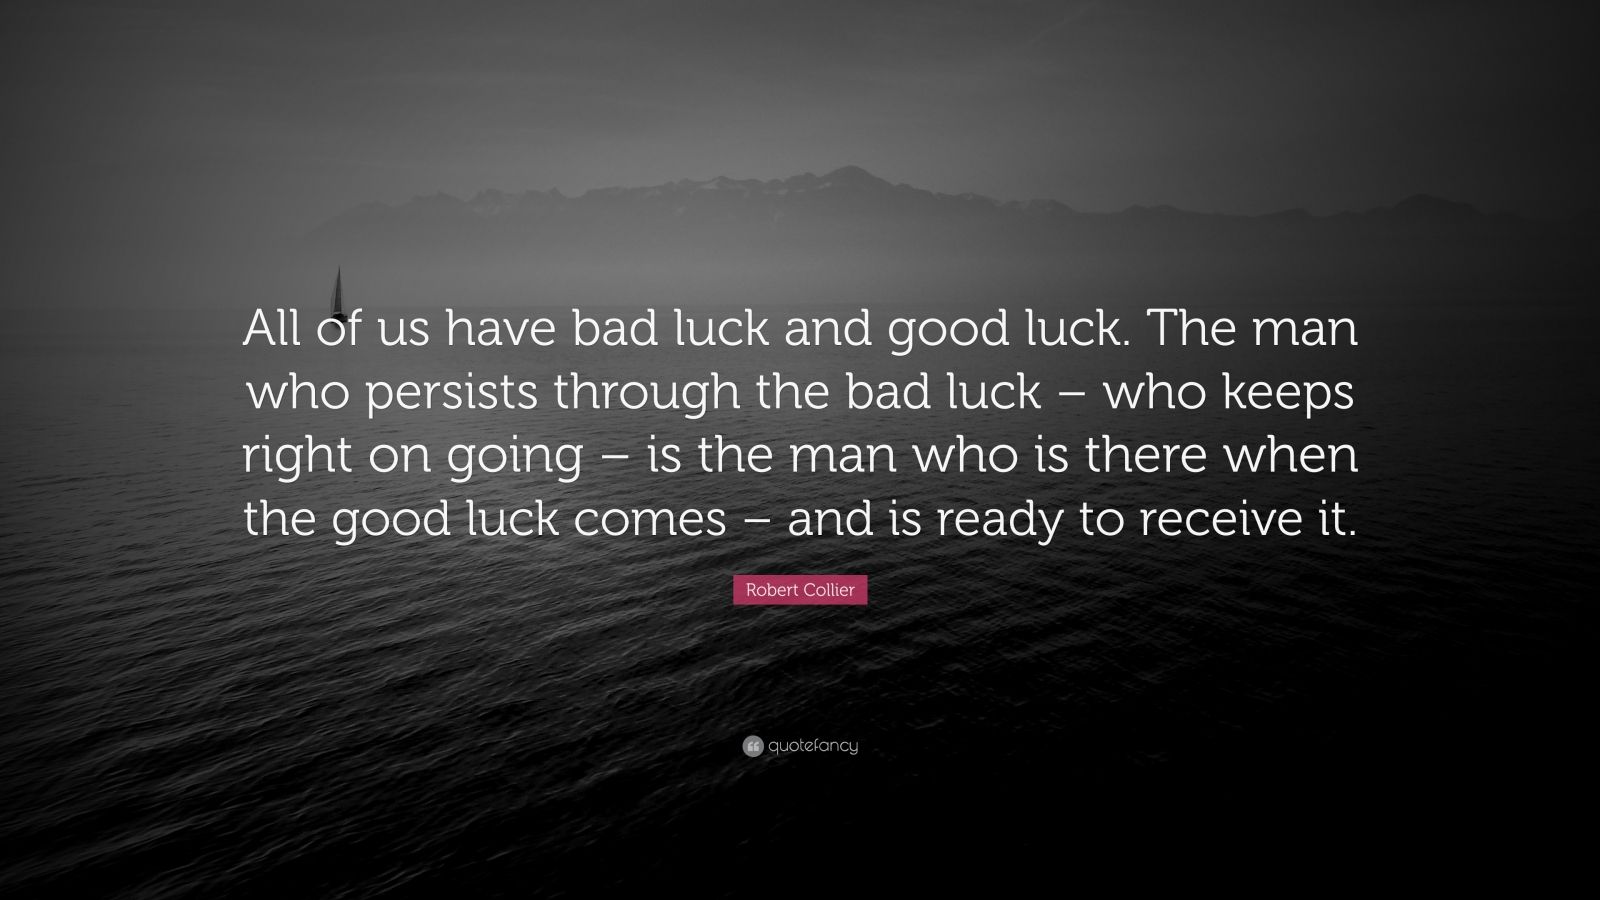 Robert Collier Quote: “All of us have bad luck and good luck. The man who persists luck